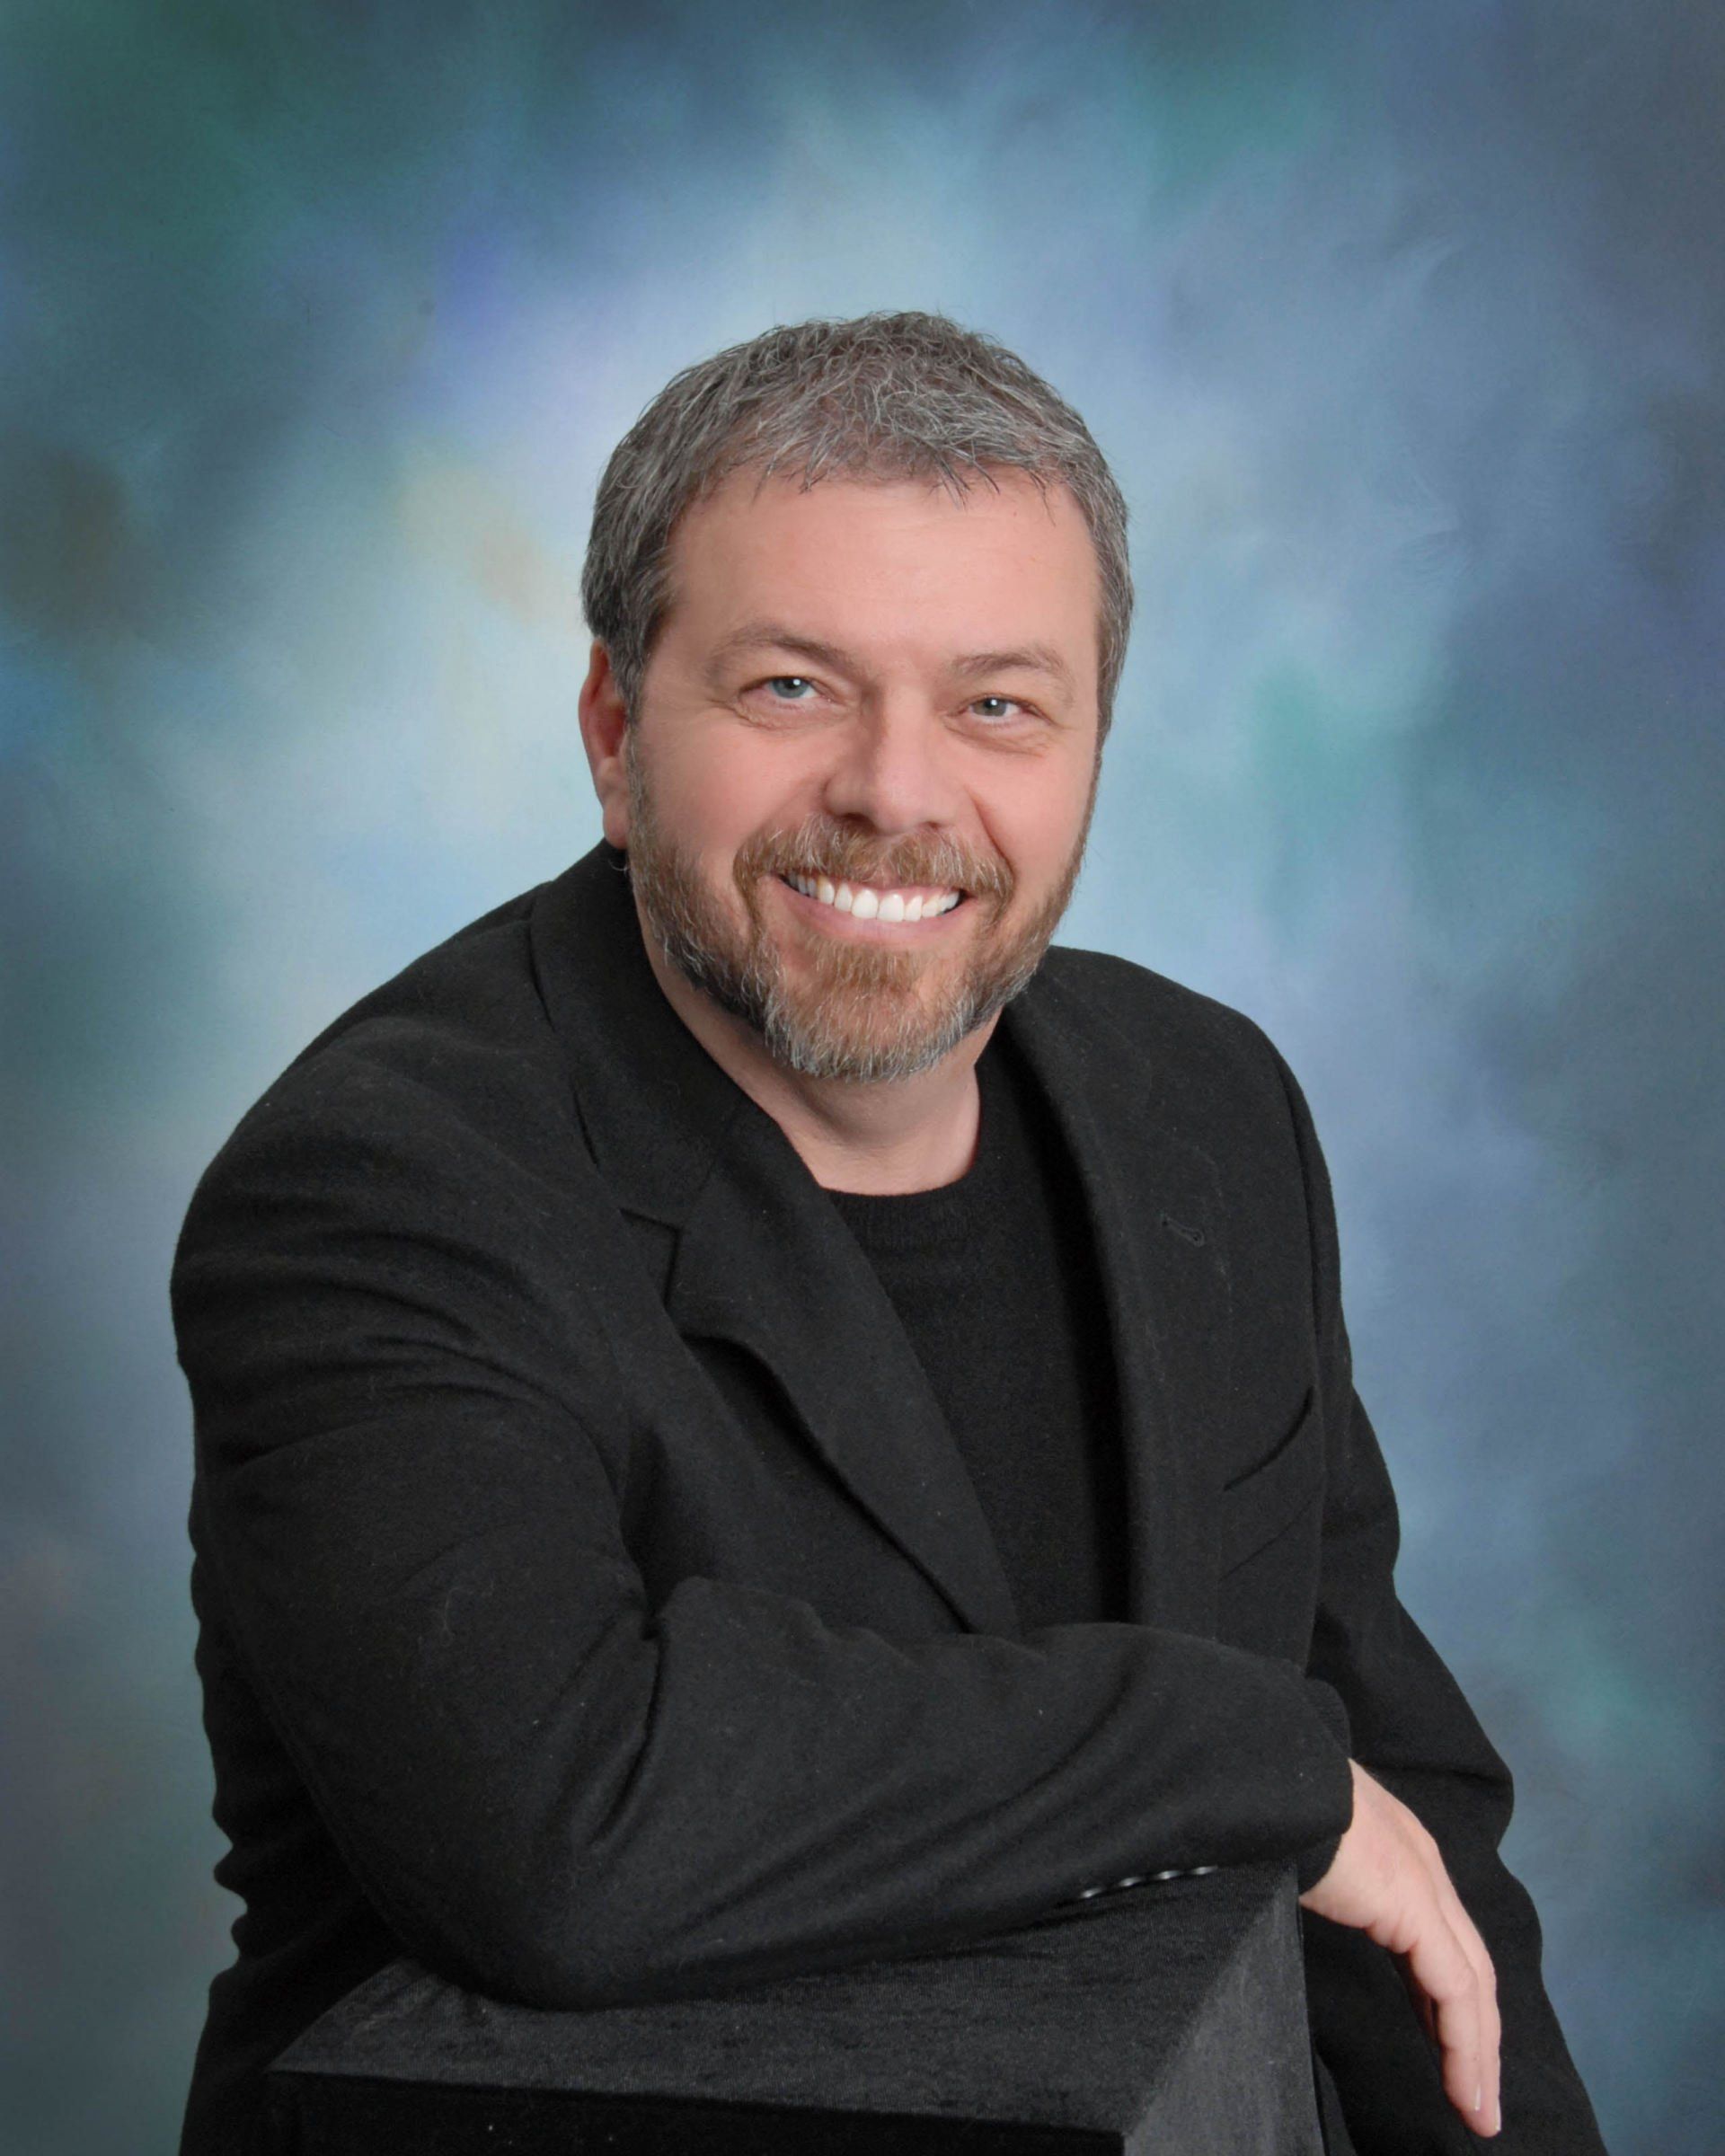 Dr. Rick Butts LPCC-S, EMDR, SEP, DARTT | Cincinnati, OH Individual & Couples Therapist, Developmental & Relational Therapy | Healing Our Core Issues Institute Co-Founder